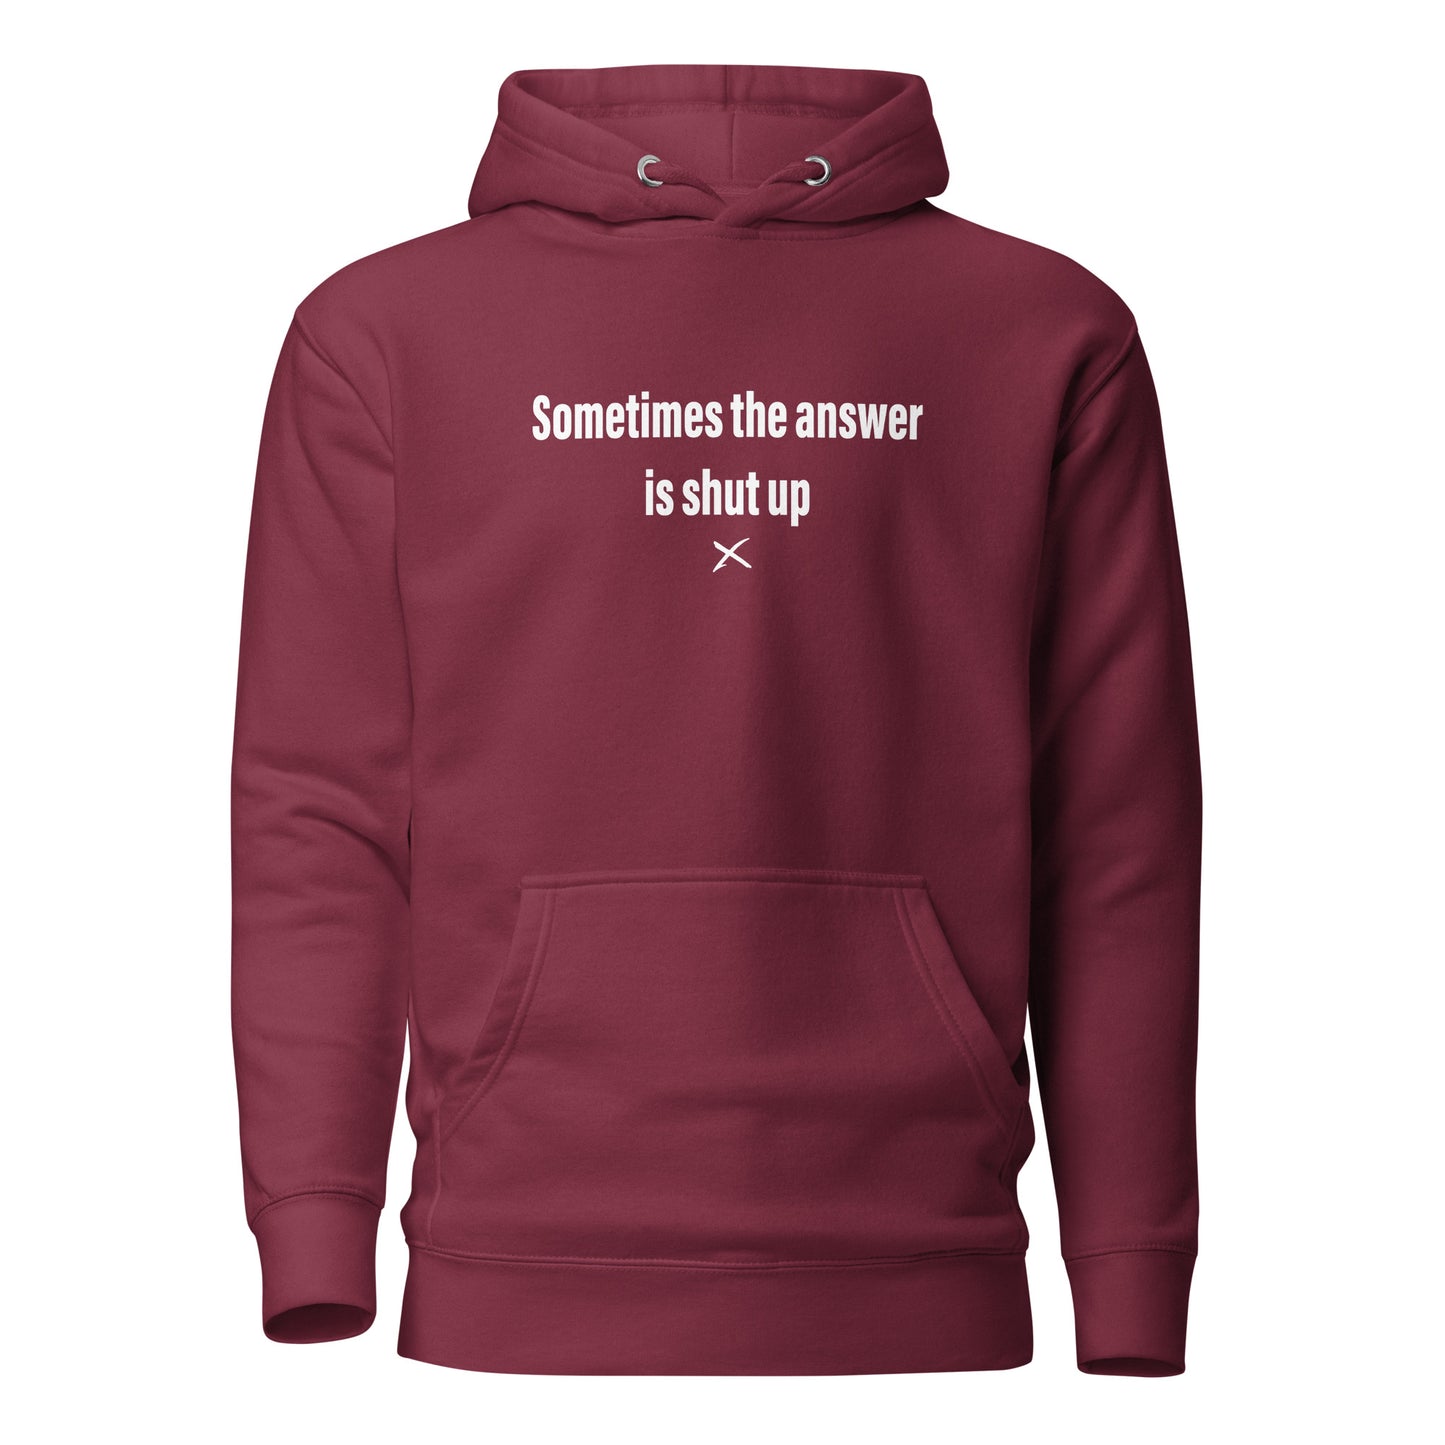 Sometimes the answer is shut up - Hoodie